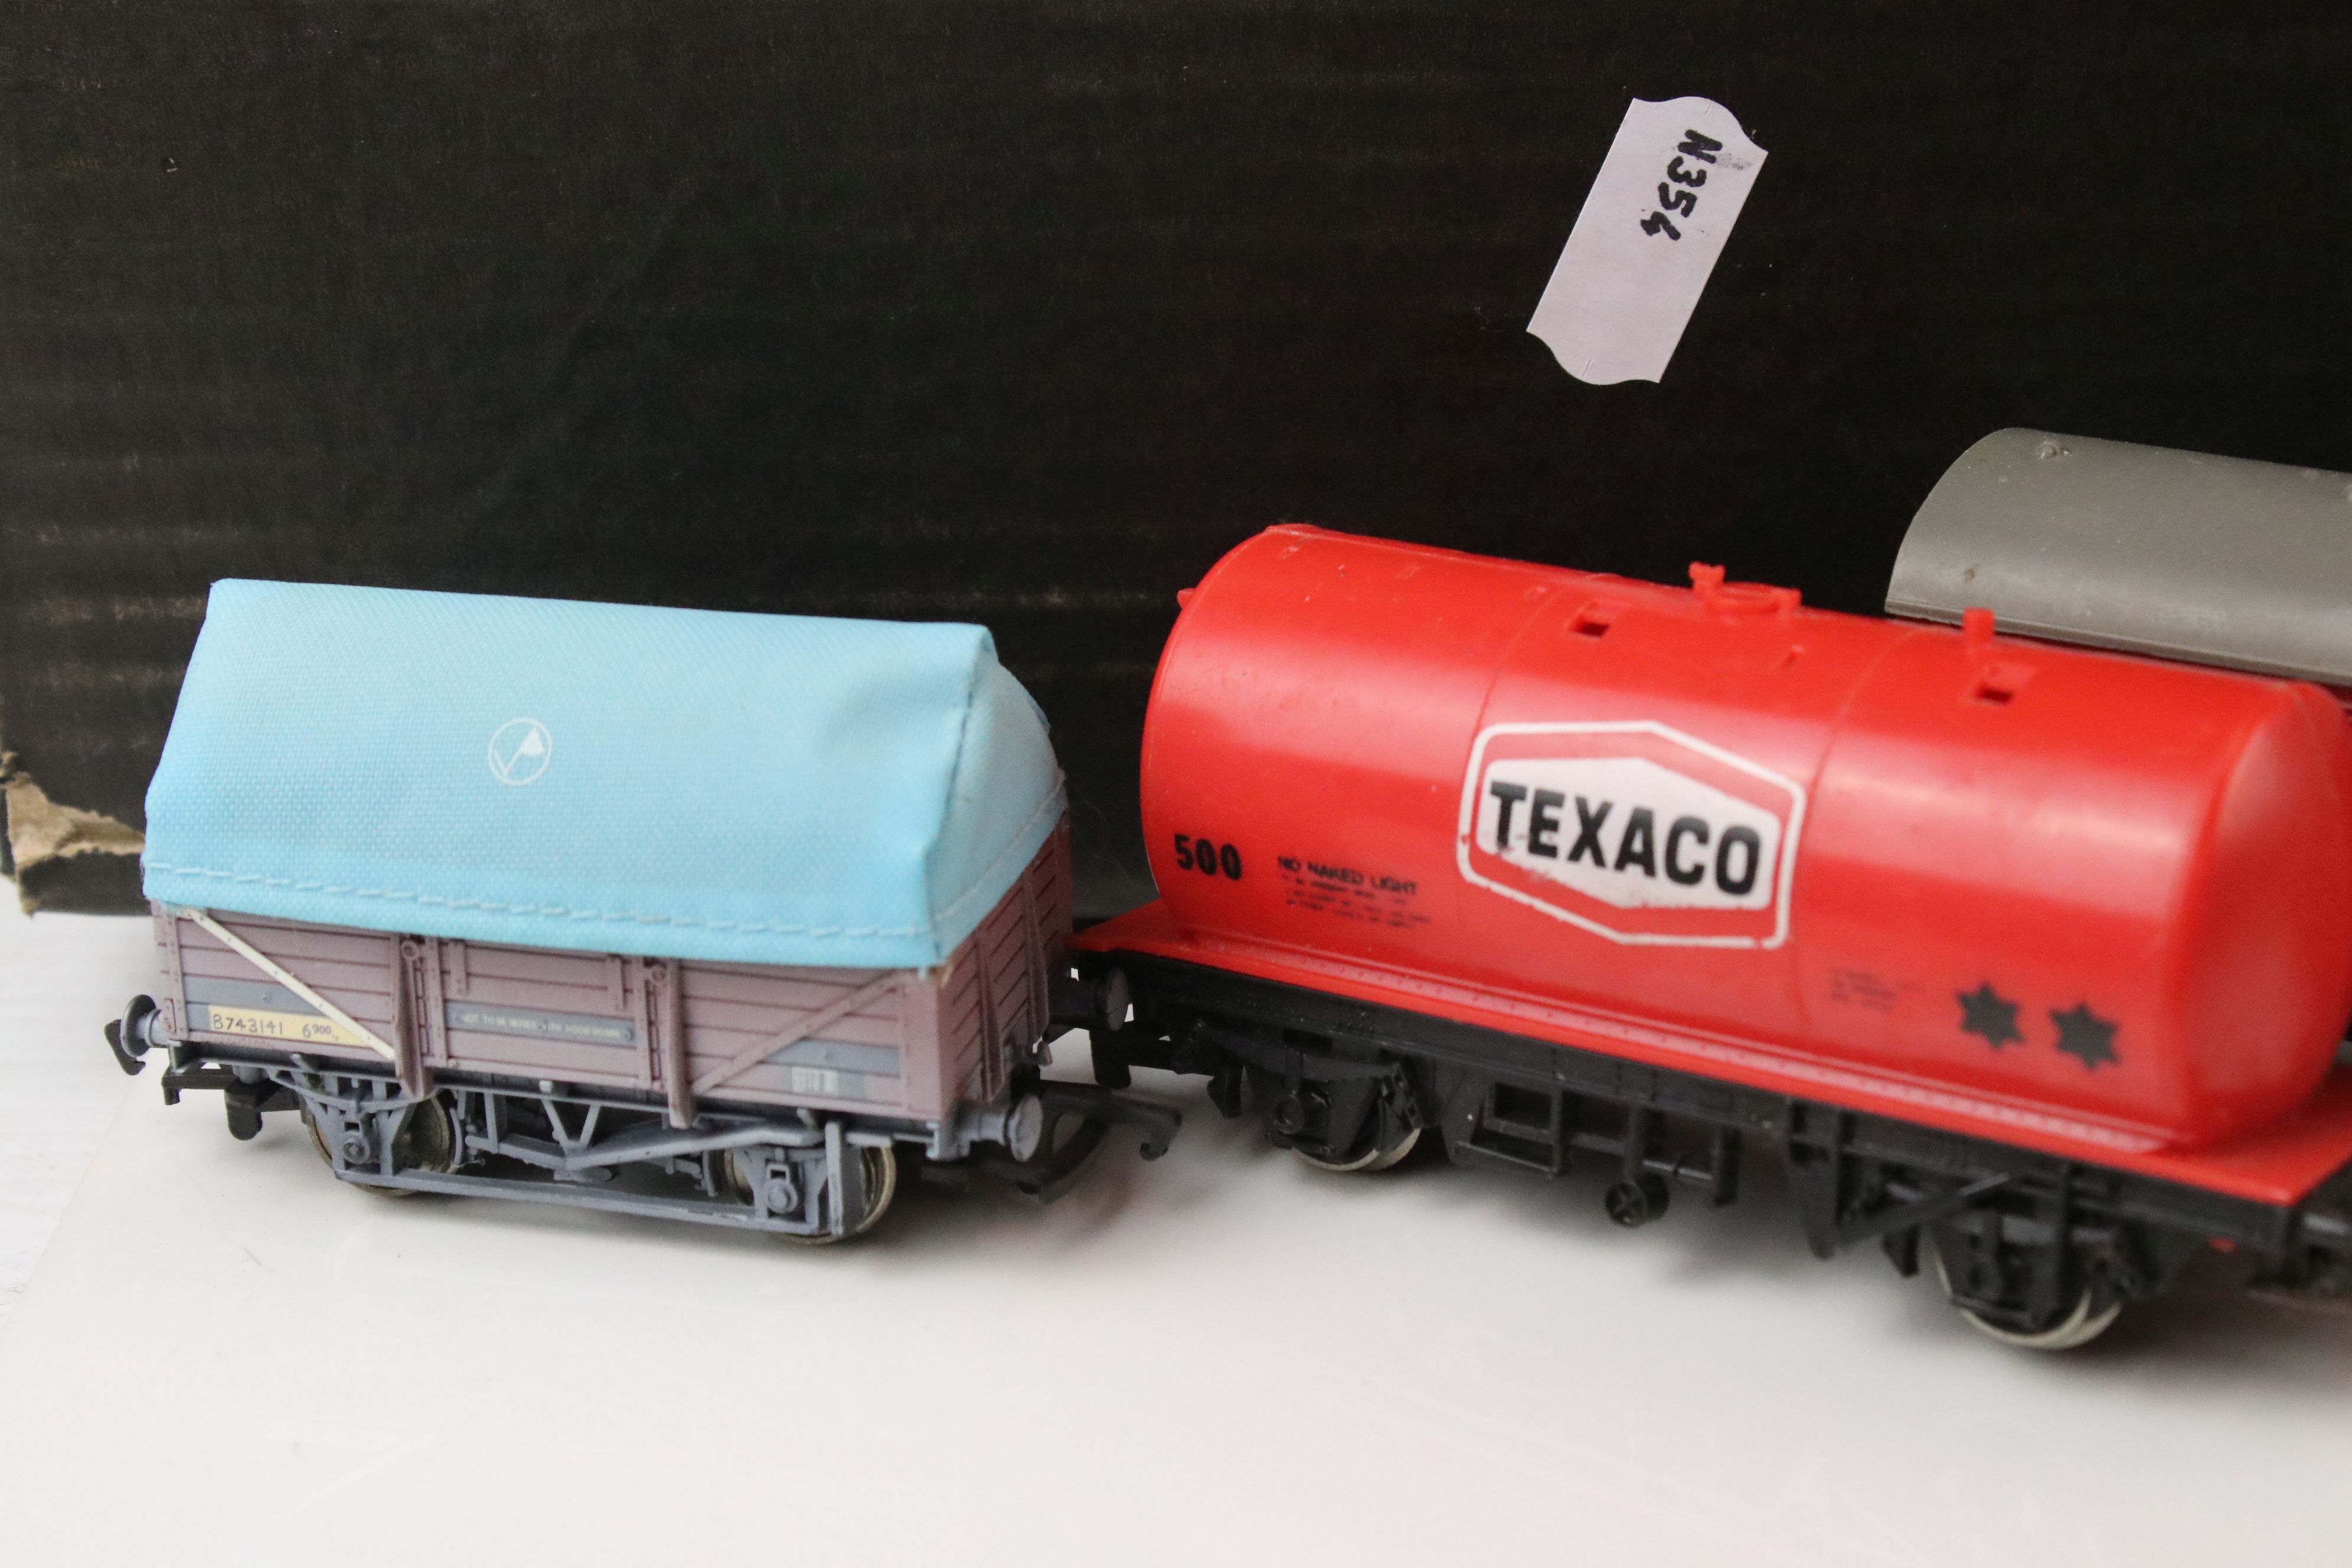 29 OO gauge items of rolling stock to include Hornby, Triang and Bachmann featuring coaches, Royal - Image 4 of 7